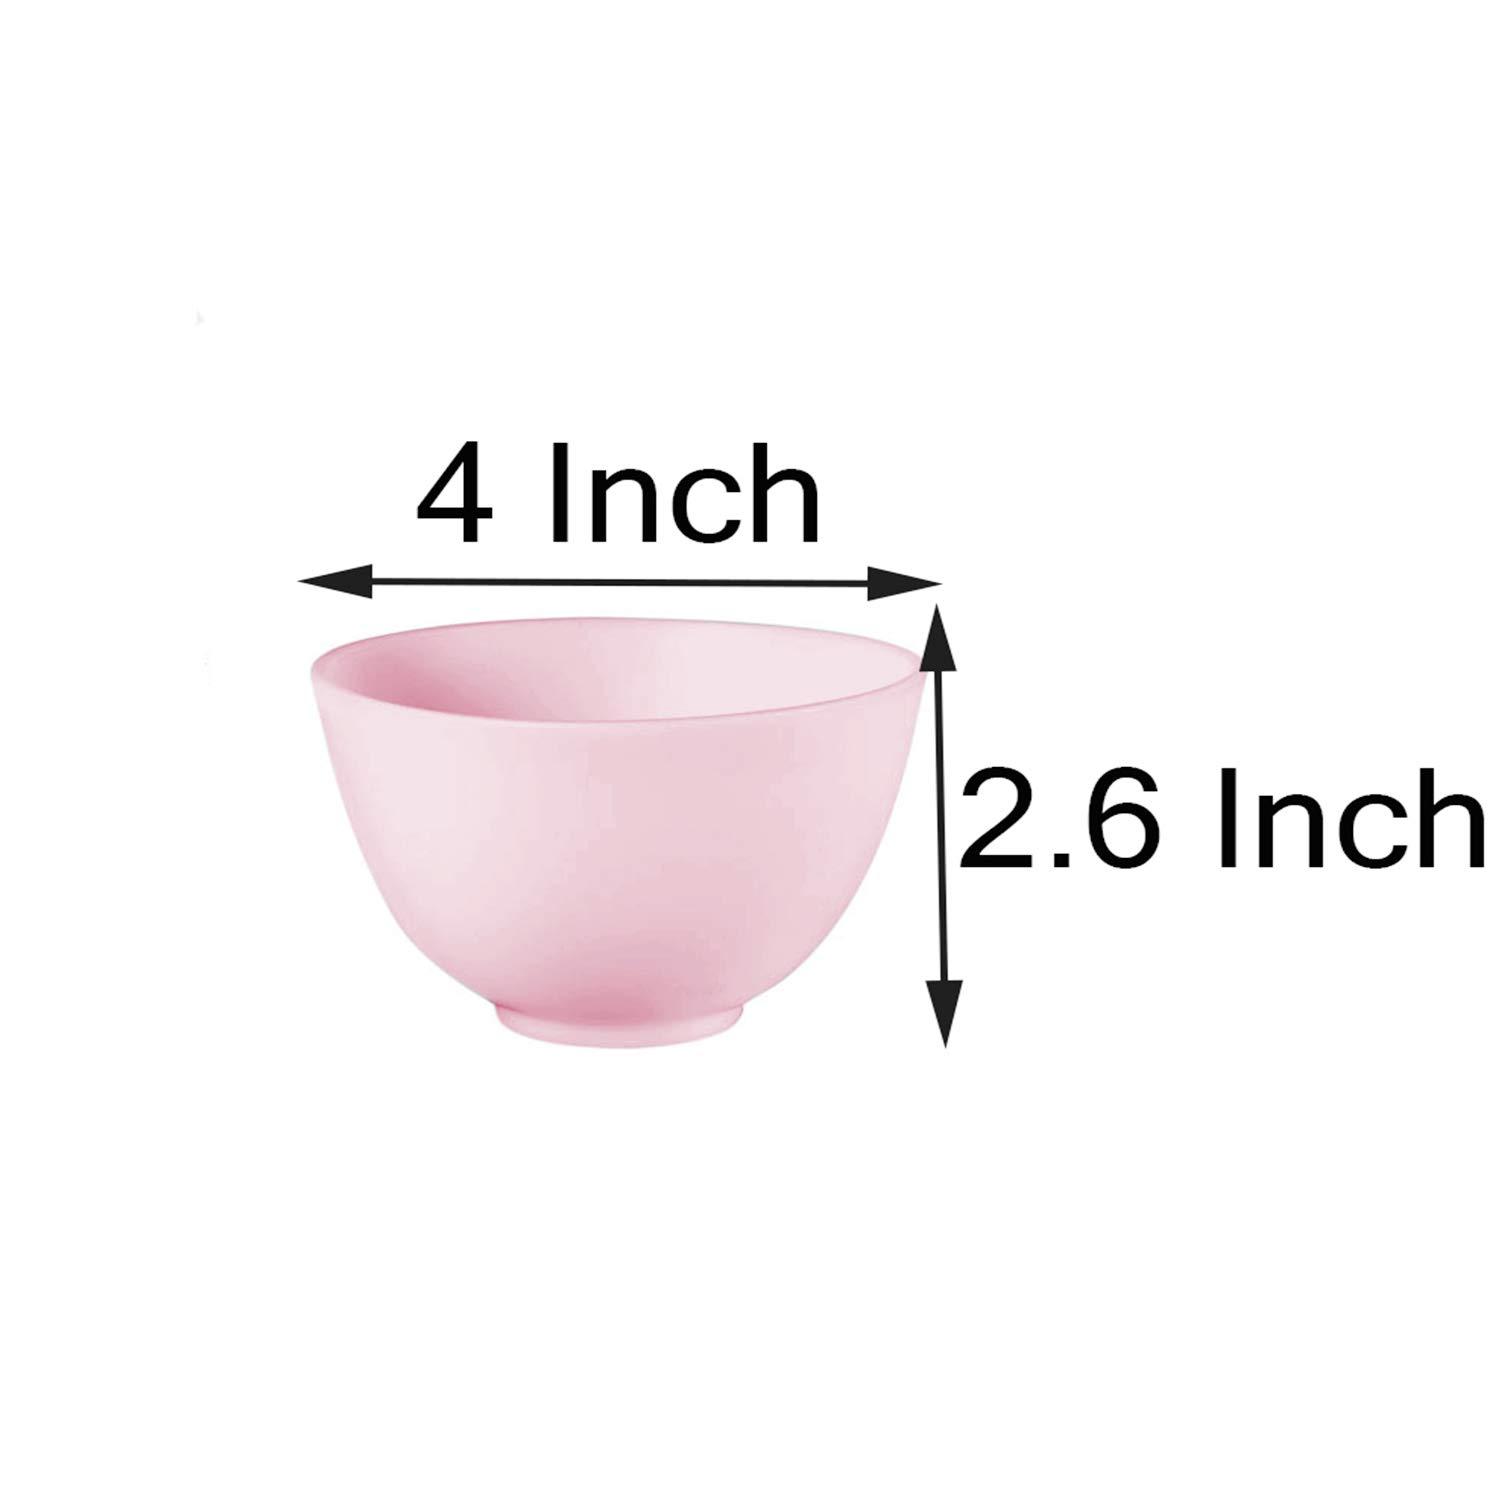 New Silicone Facial Mask Mixing Bowl For Facial Mask, Mud Mask And